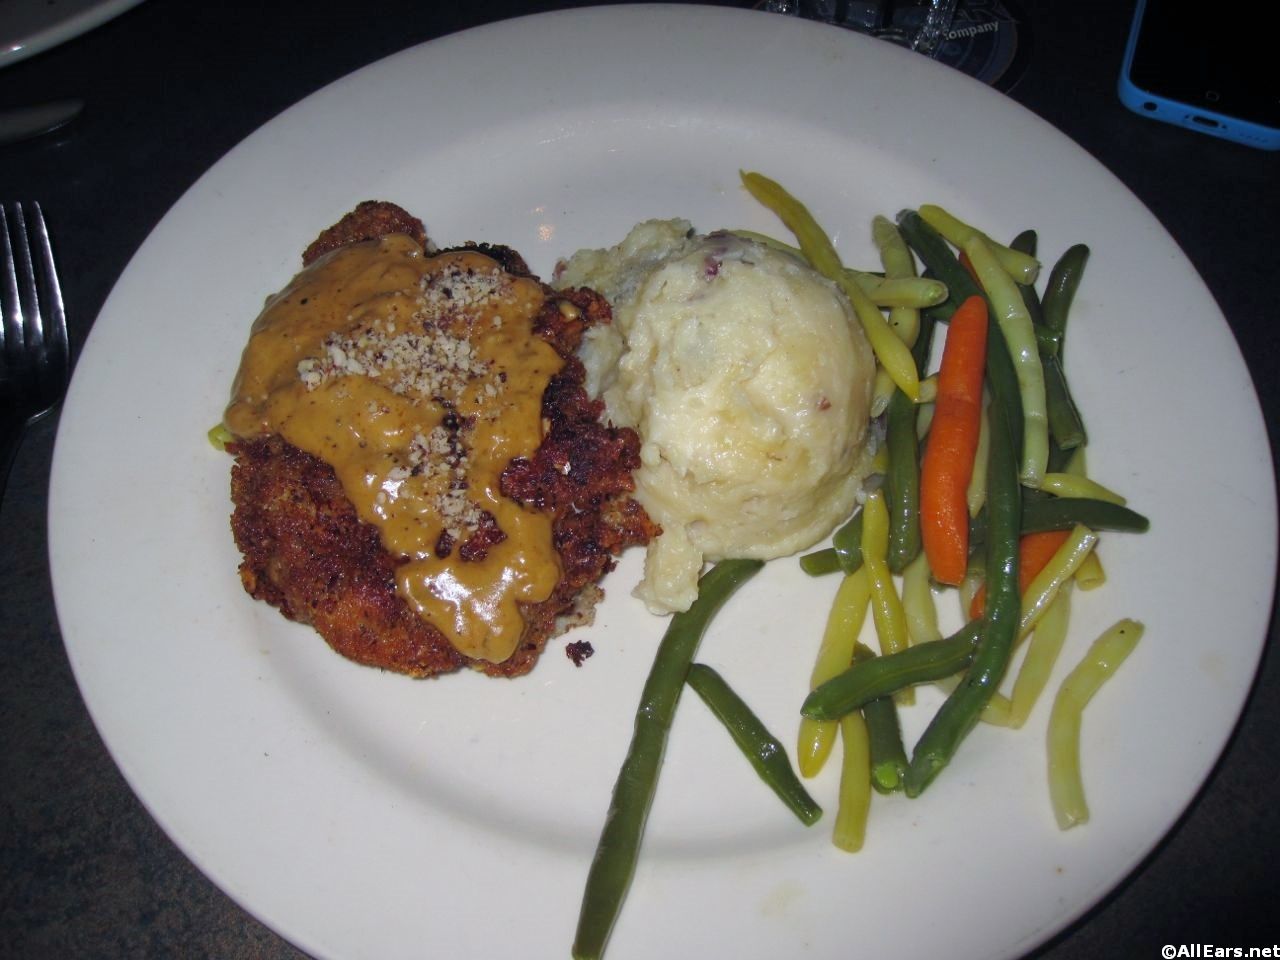 Previously Offered Hazelnut Crusted Chicken